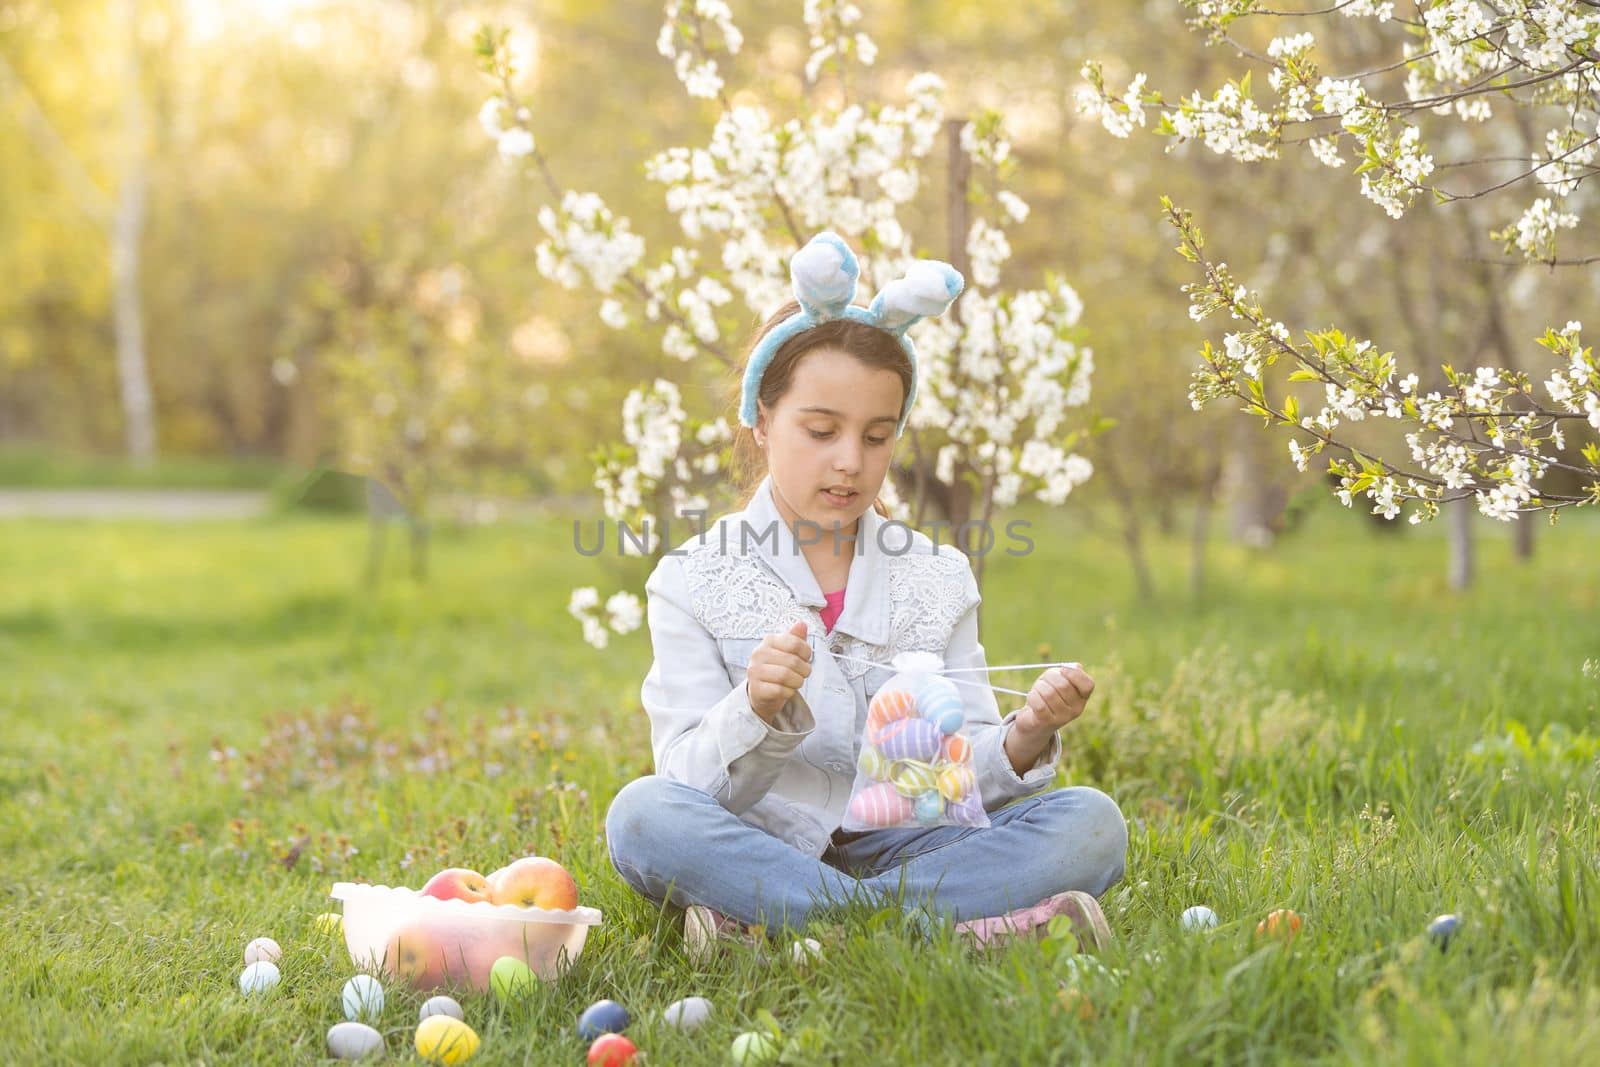 Adorable little girl in bunny ears, blooming tree branch outdoors on a spring day. Kid having fun on Easter egg hunt in the garden by Andelov13